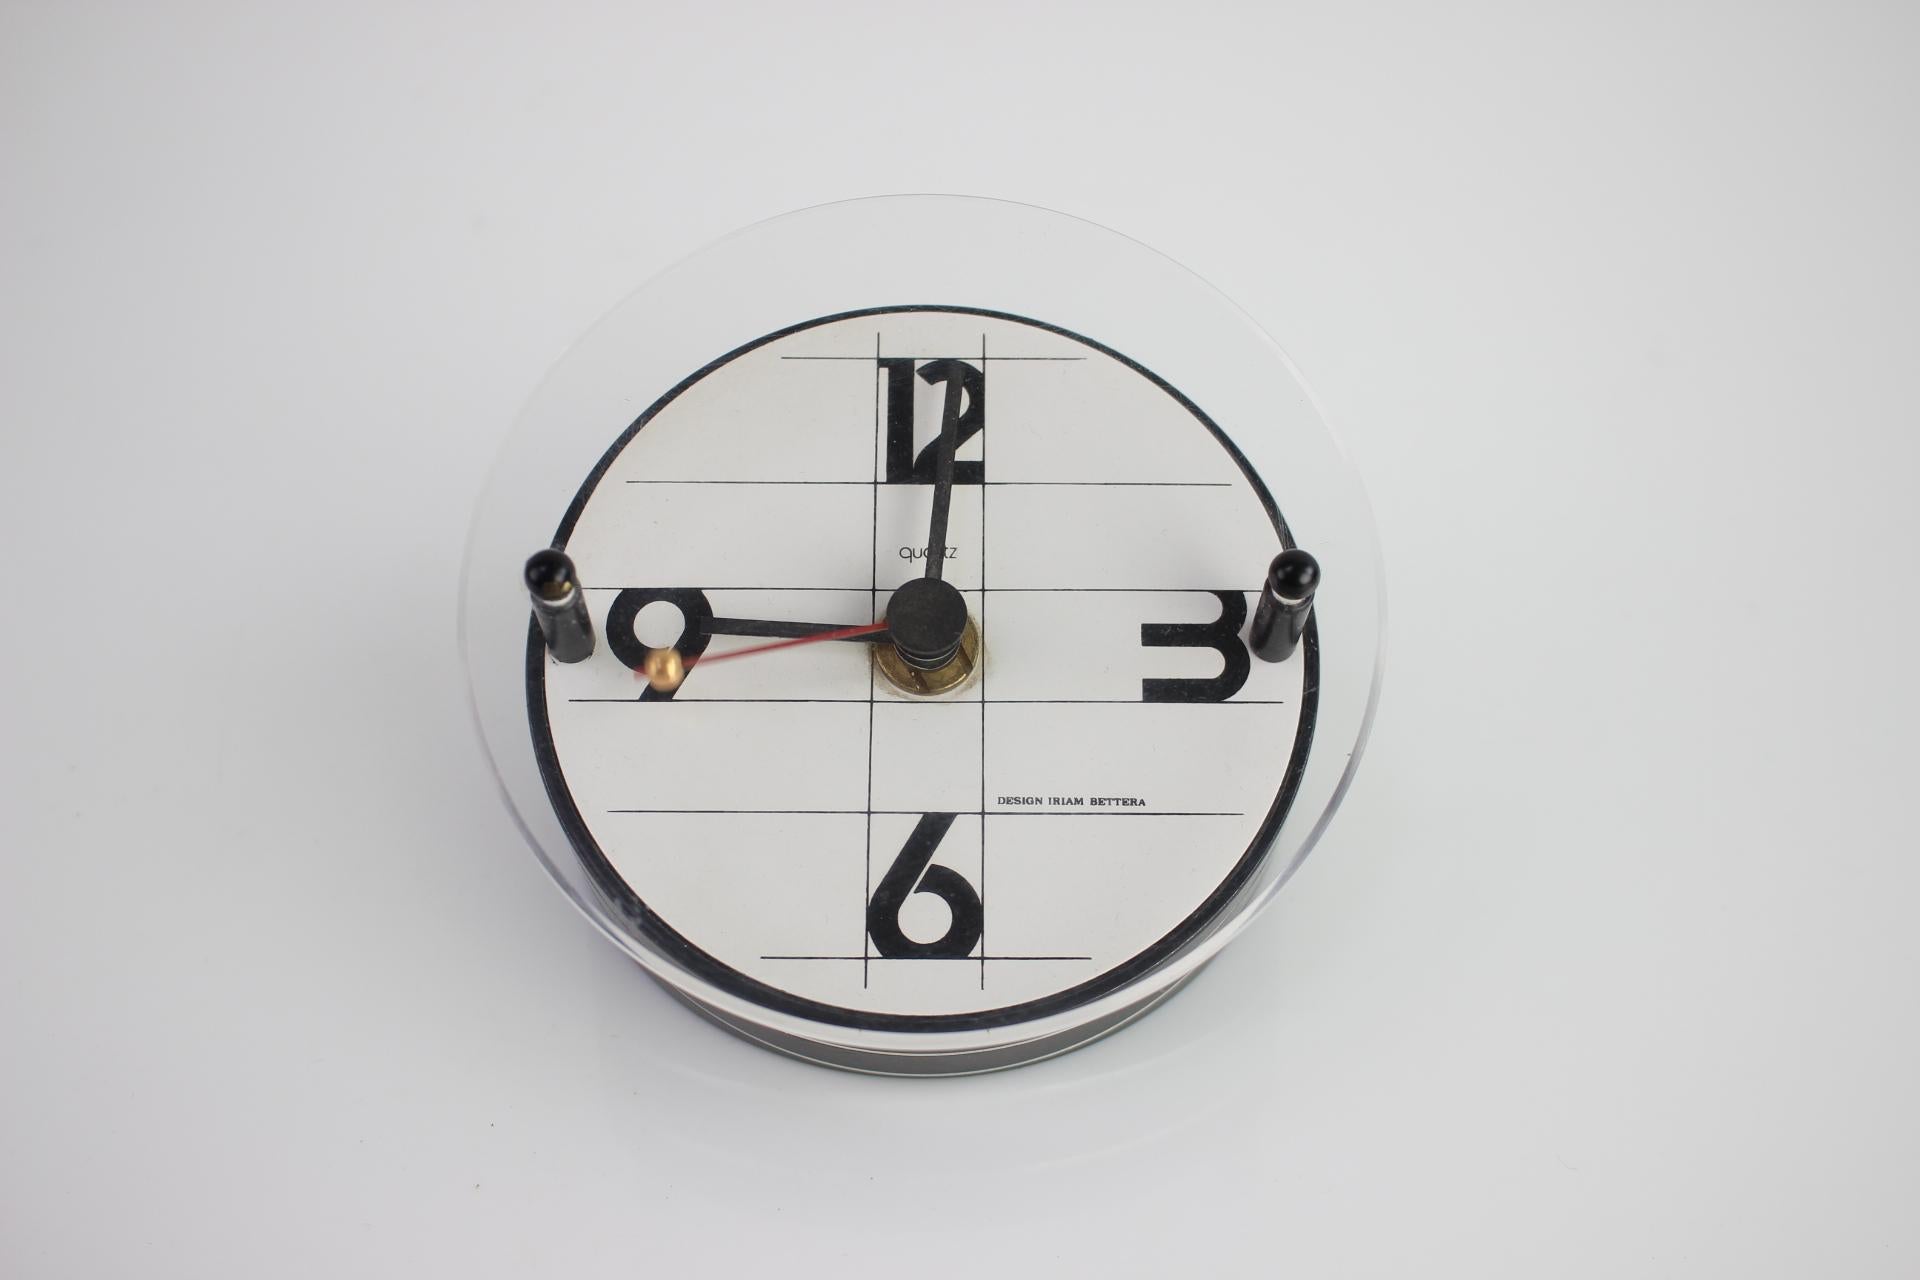 Good original condition.
Made by 1980s.
Fully functional

Stunning Postmodern clock by the Italian architect and designer Iriam Bettera.
Bettera created several wall and desk clocks Italy in the 1980s.

This model has a colorful and constructivist